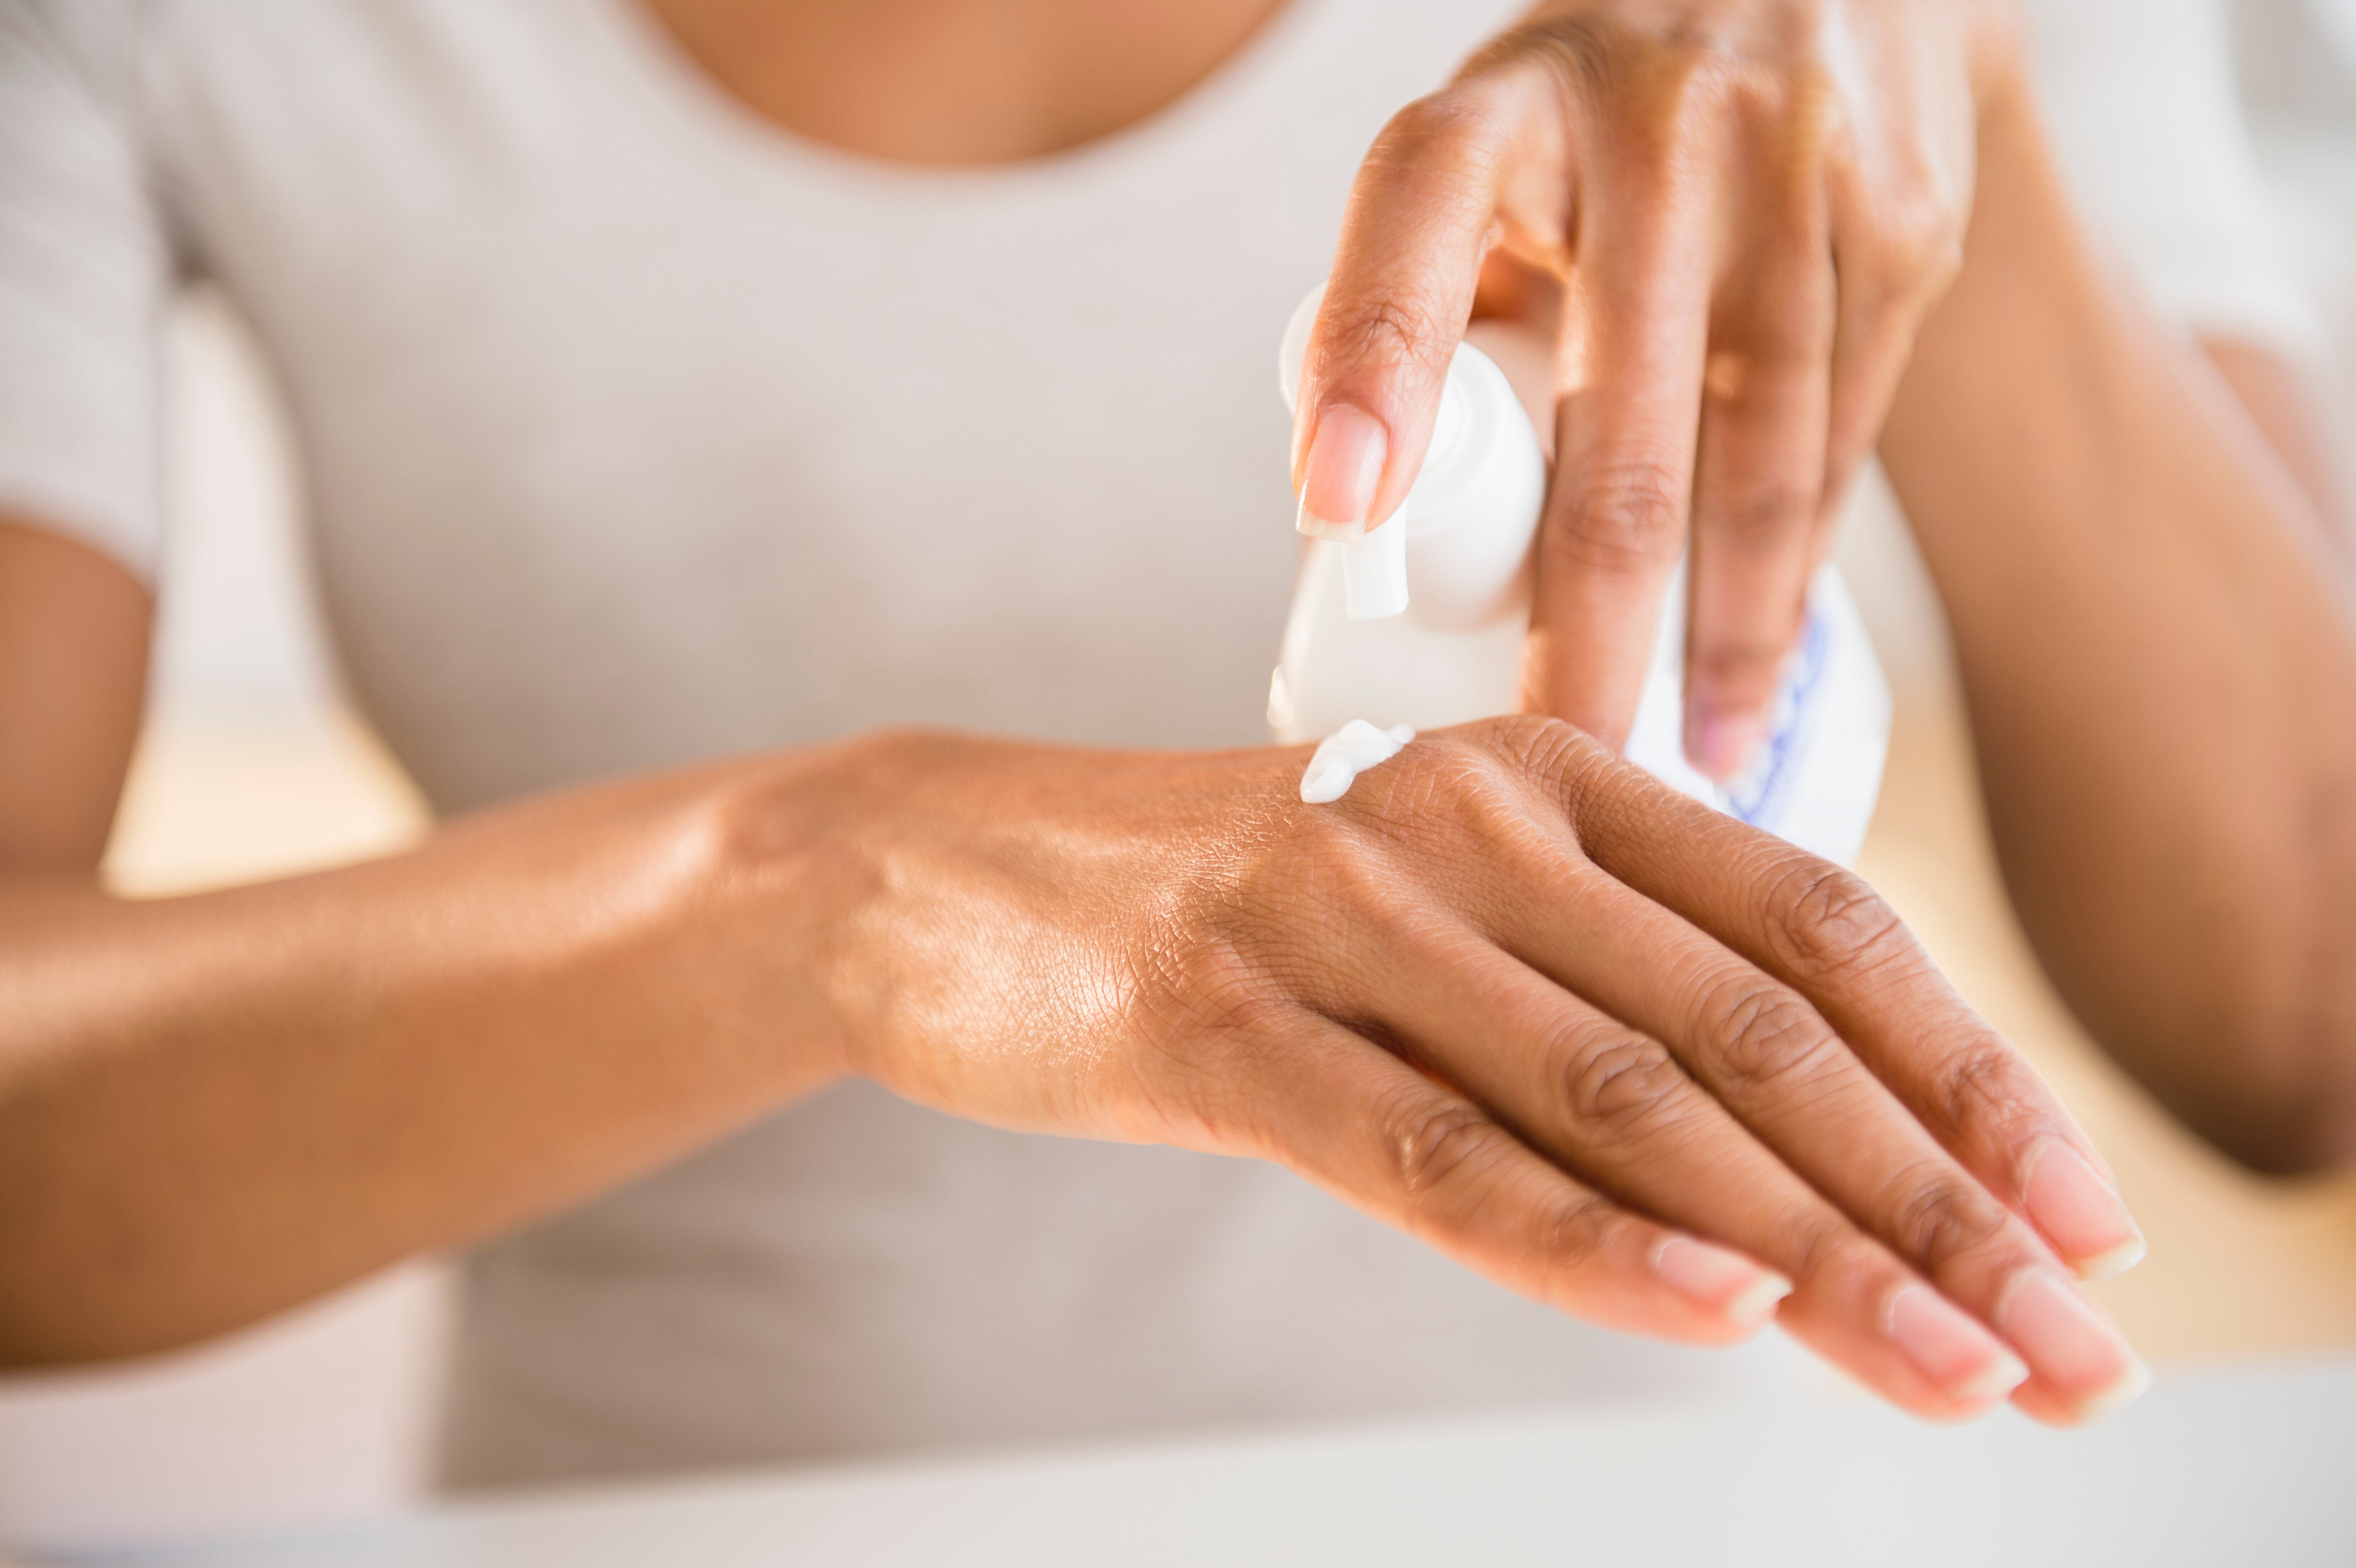 These Are The Spots Most People Miss When Putting On Sunscreen, And It's Actually Pretty Dangerous
